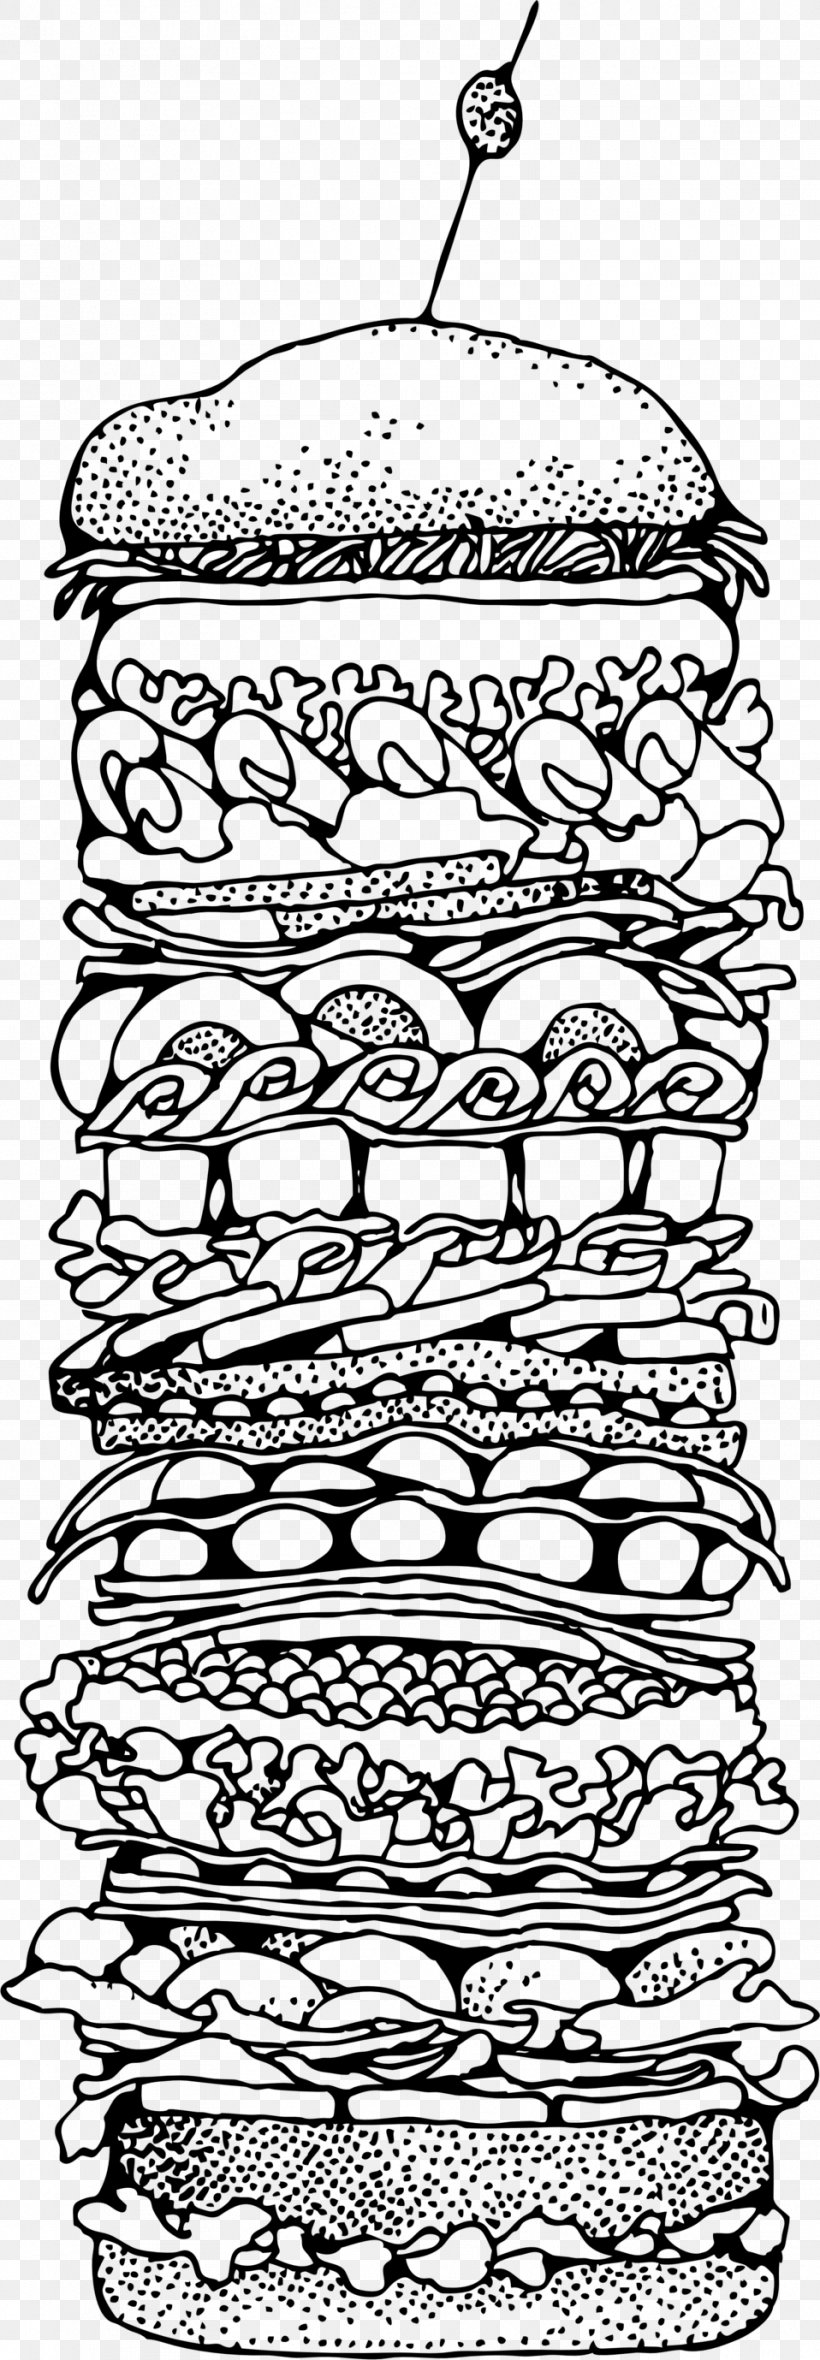 Hamburger Peanut Butter And Jelly Sandwich Submarine Sandwich Clip Art, PNG, 958x2758px, Hamburger, Area, Black And White, Cheese, Coloring Book Download Free